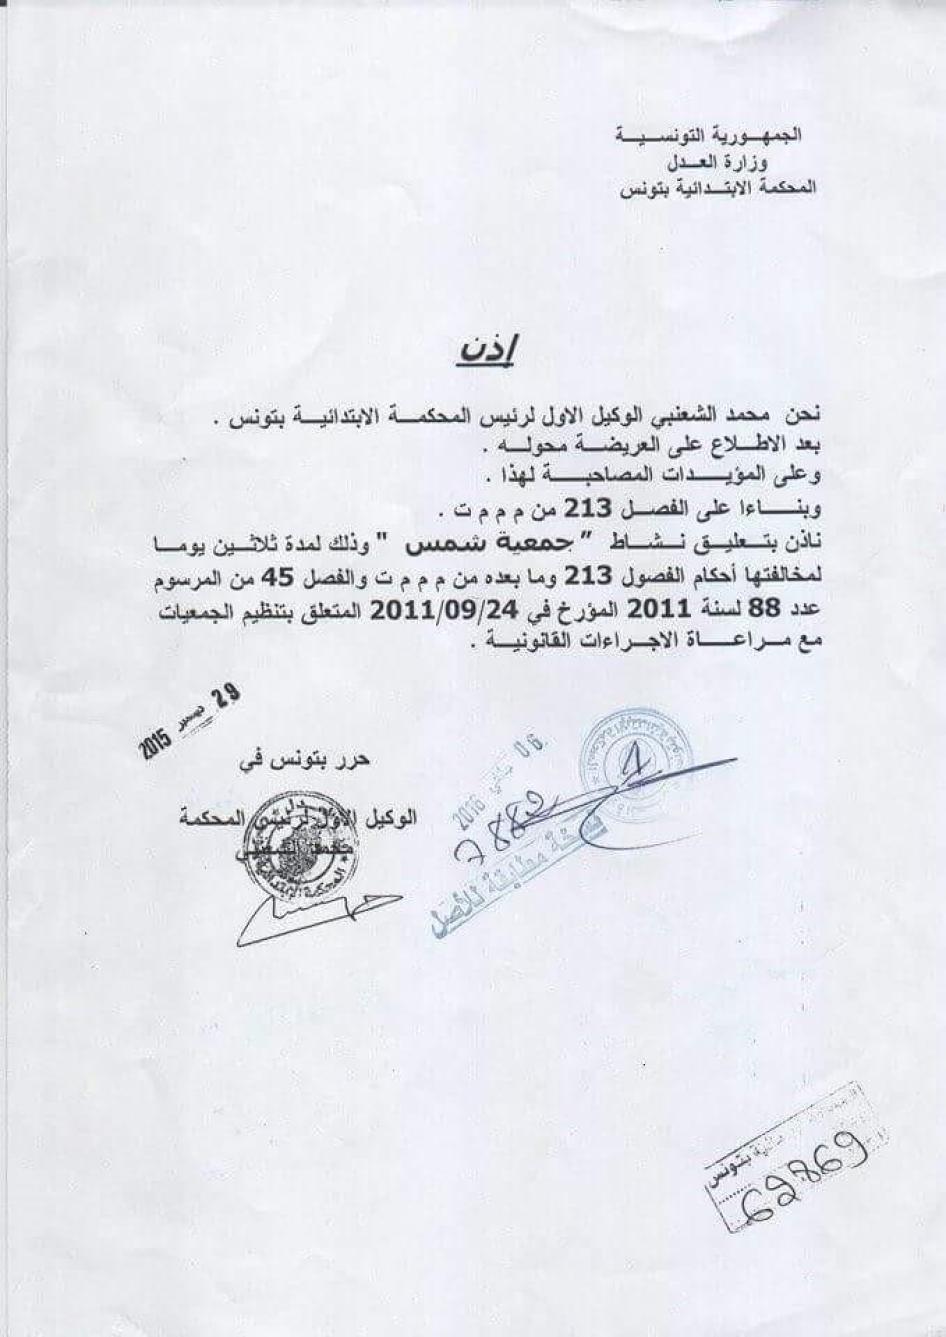 A copy of an authorization of suspension of Chams association, signed by the first deputee of the Tunis Court Judge, Mohamed Chaanebi, on December 29, 2015.